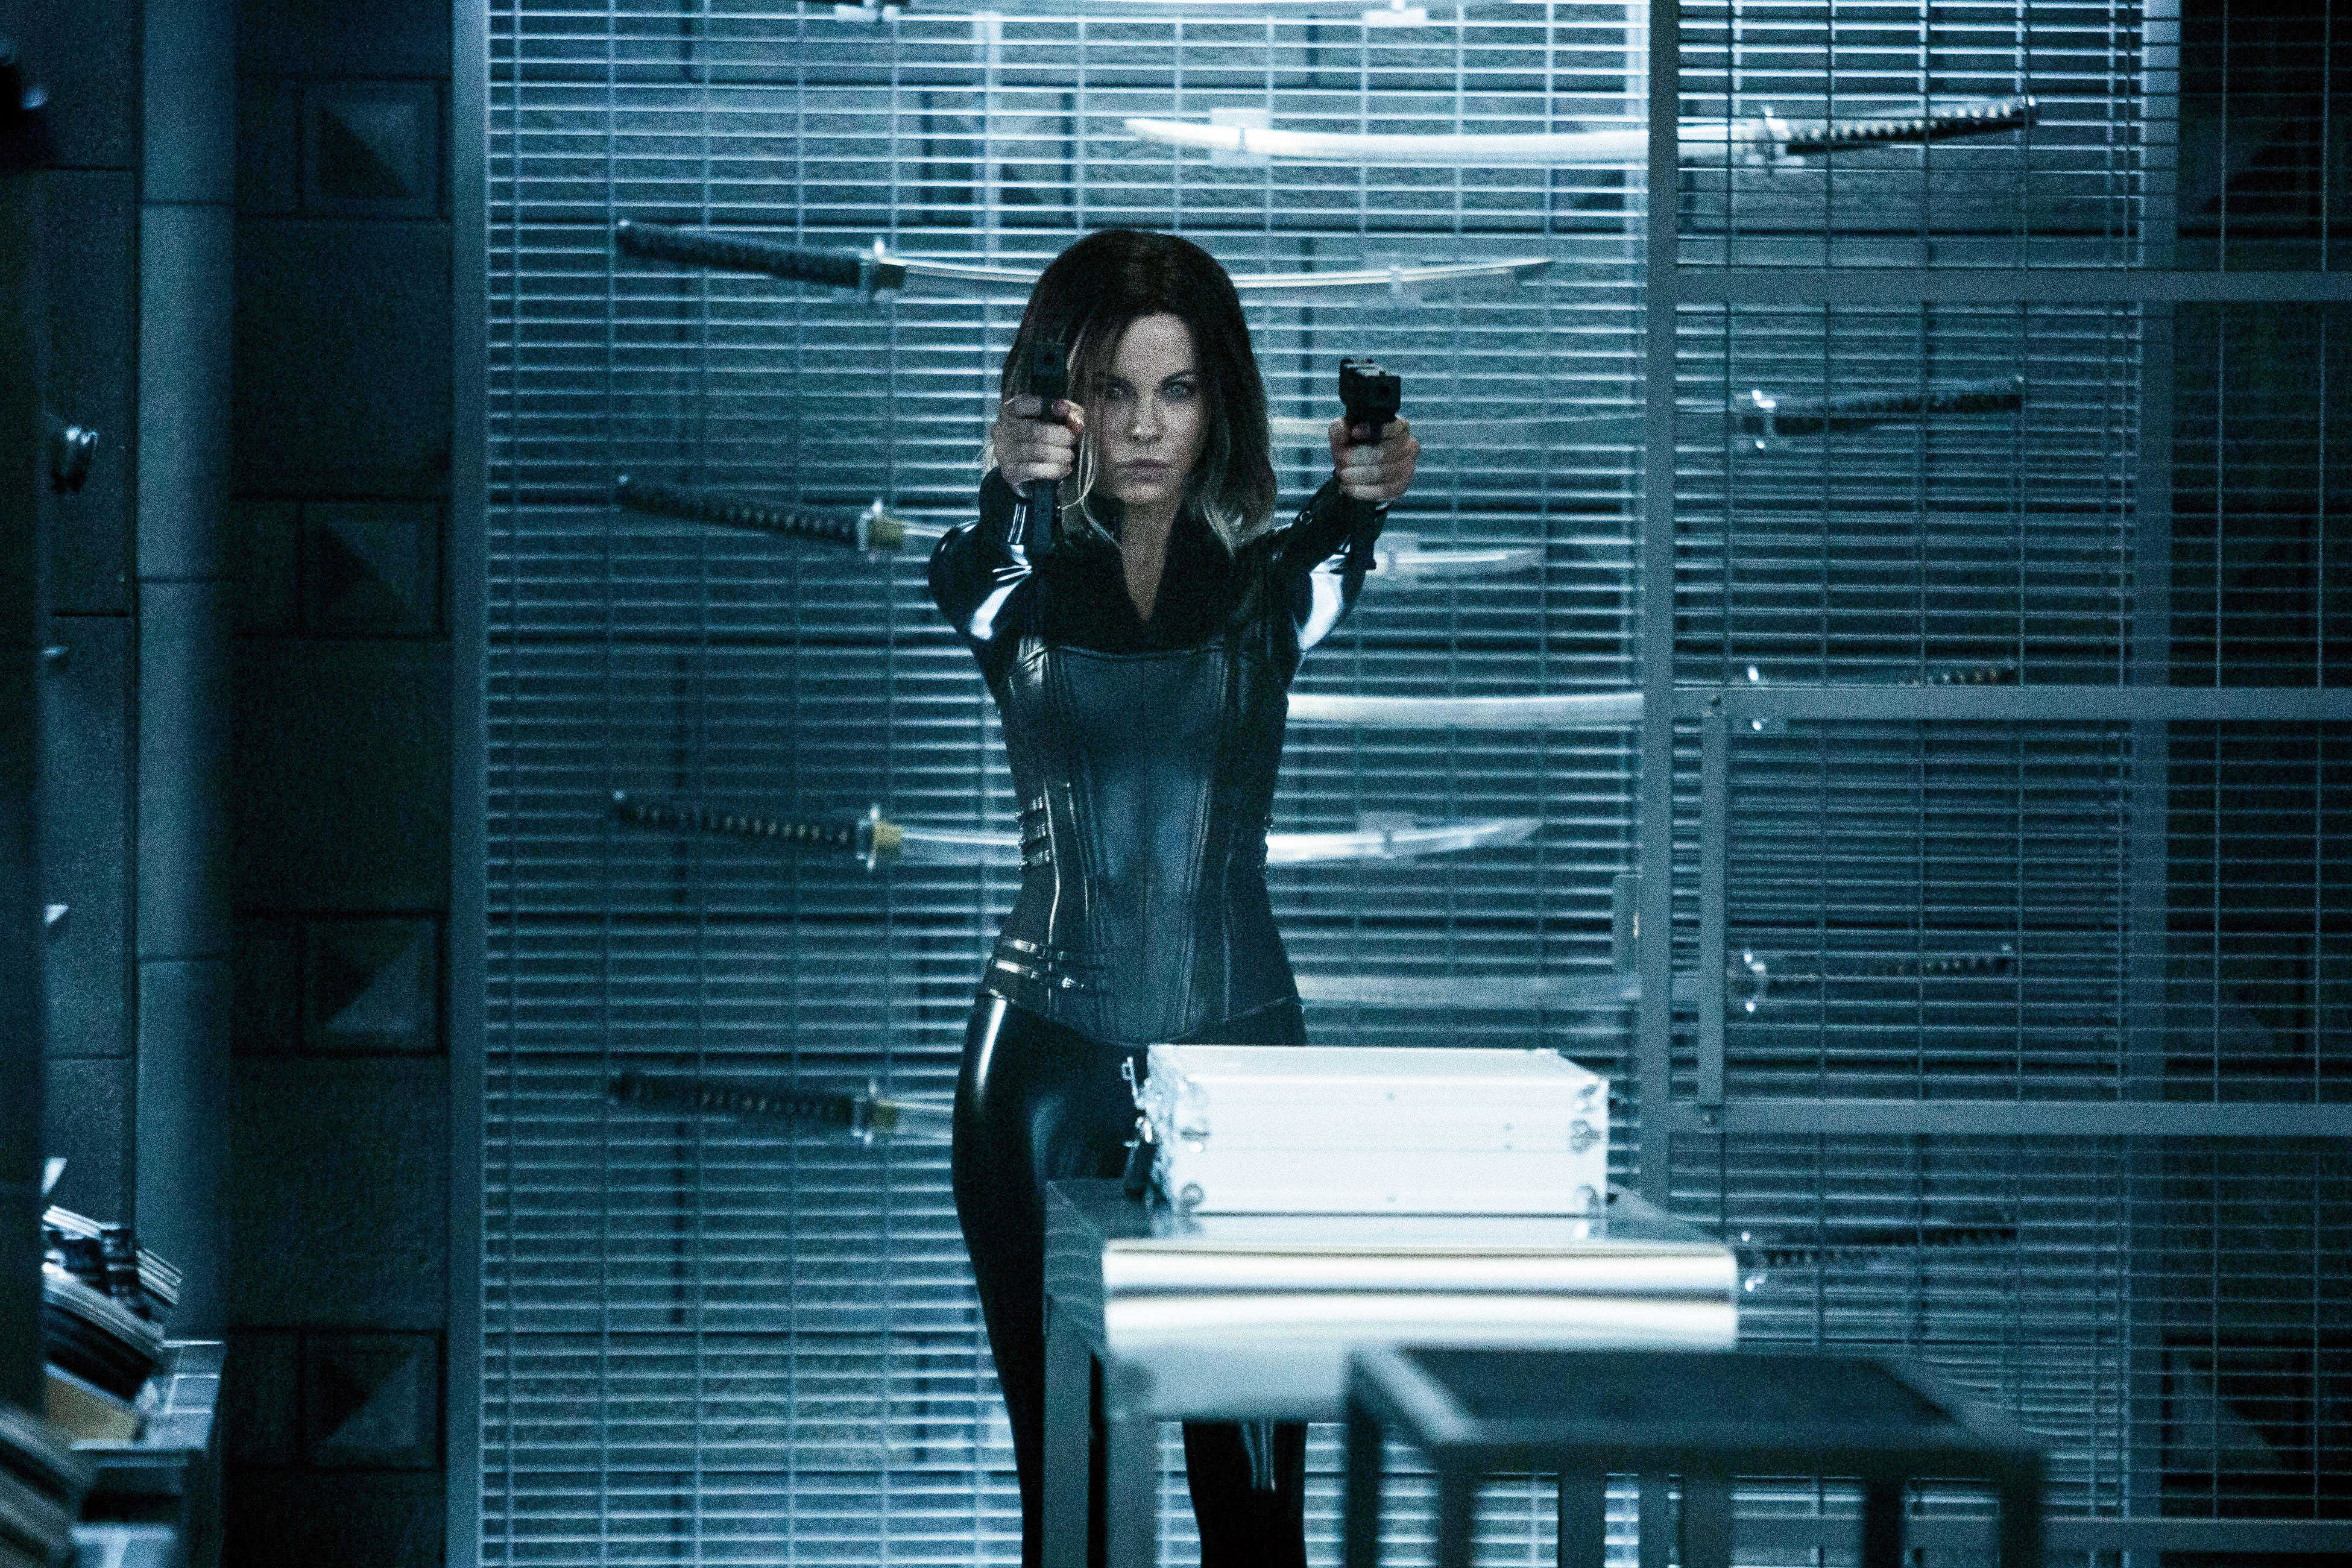 Kate starred in the Underworld series of films